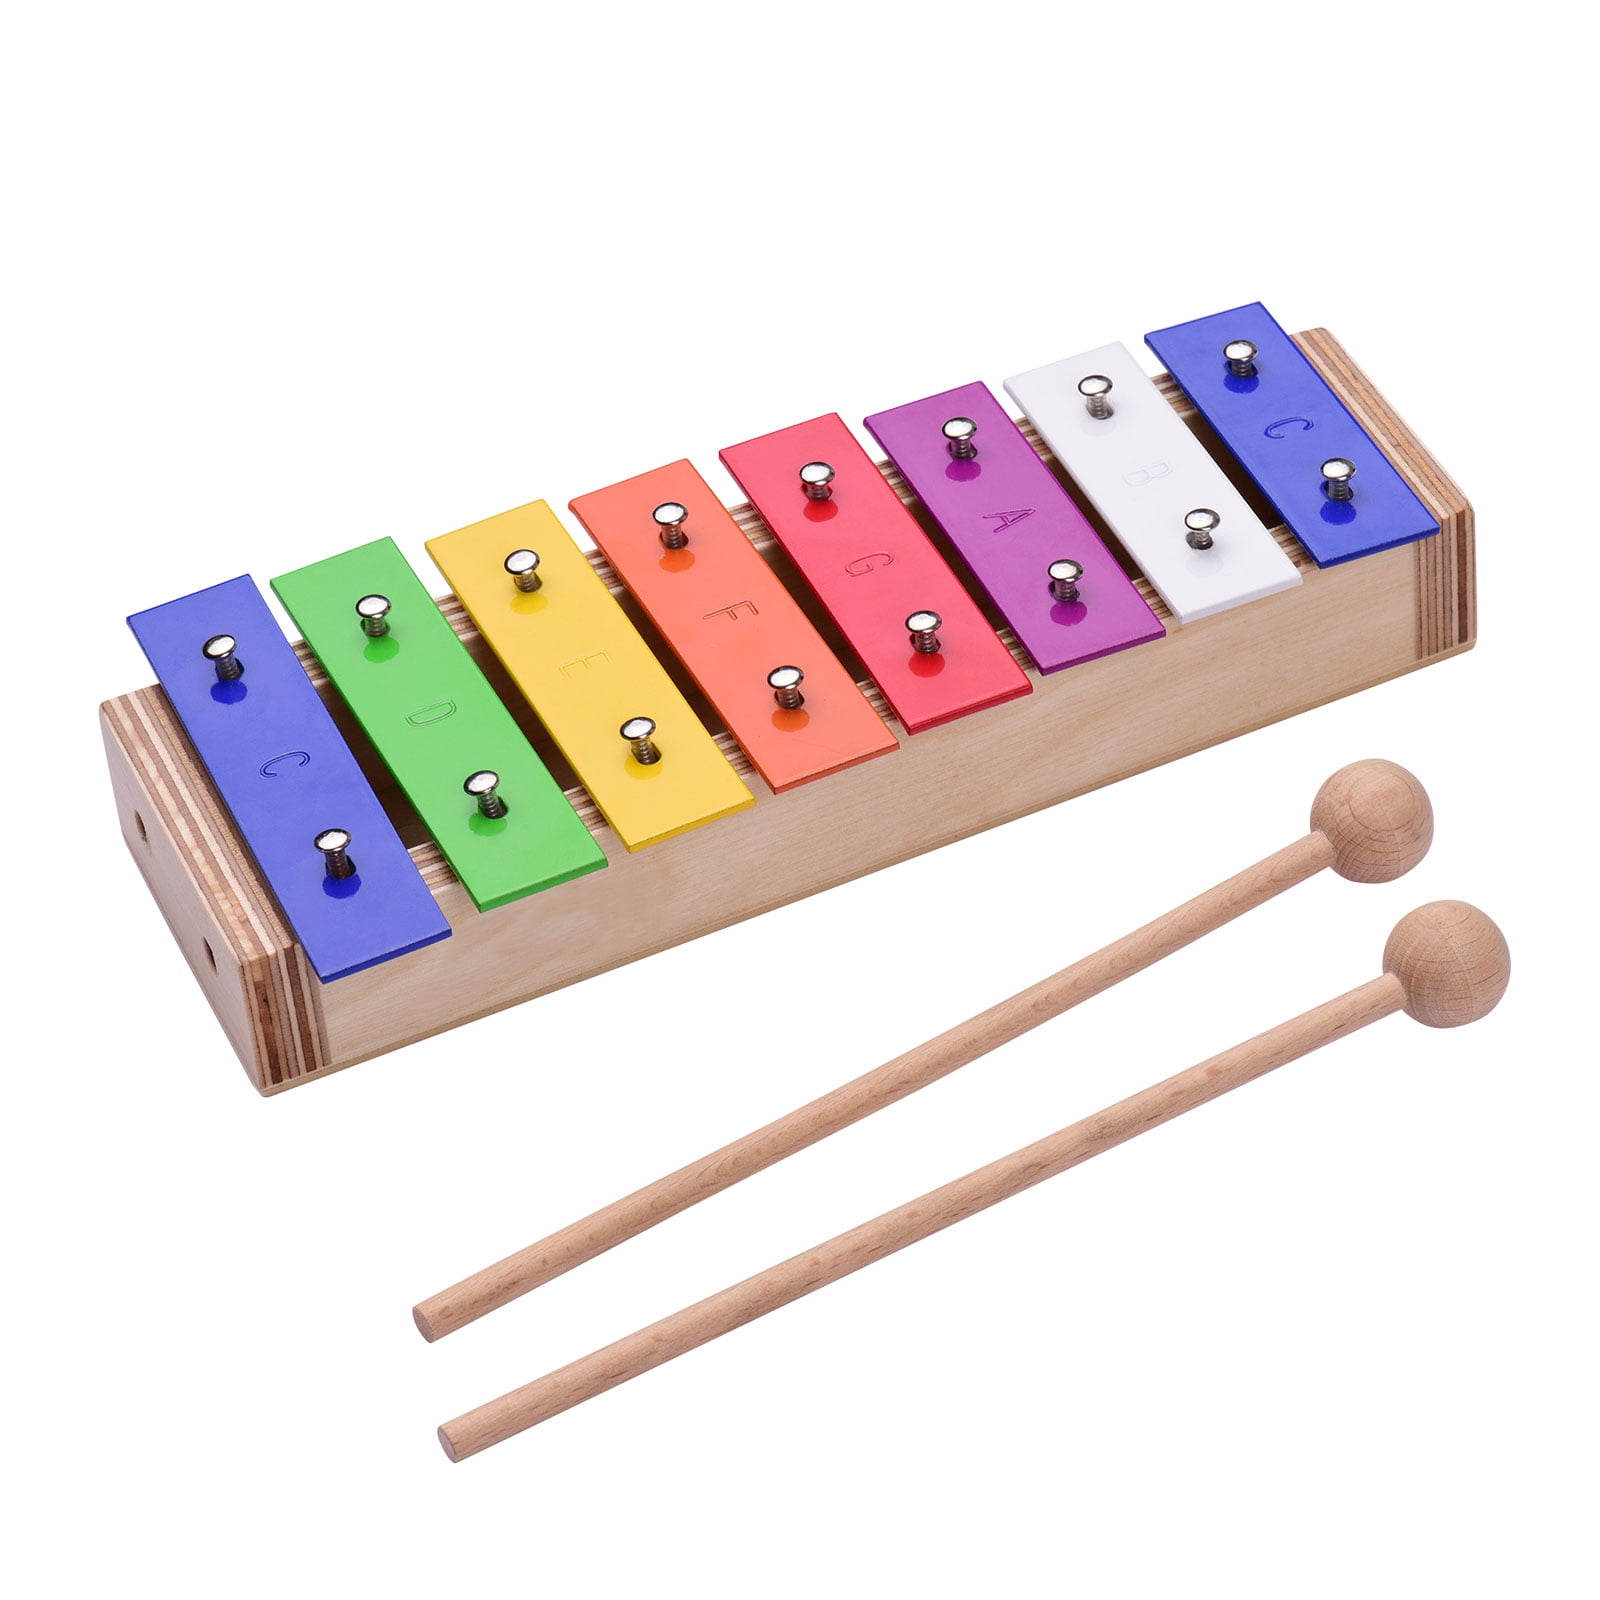 Xylophone Glockenspiel Musical Instrument Wooden Toy Percussion Gift Toddlers 